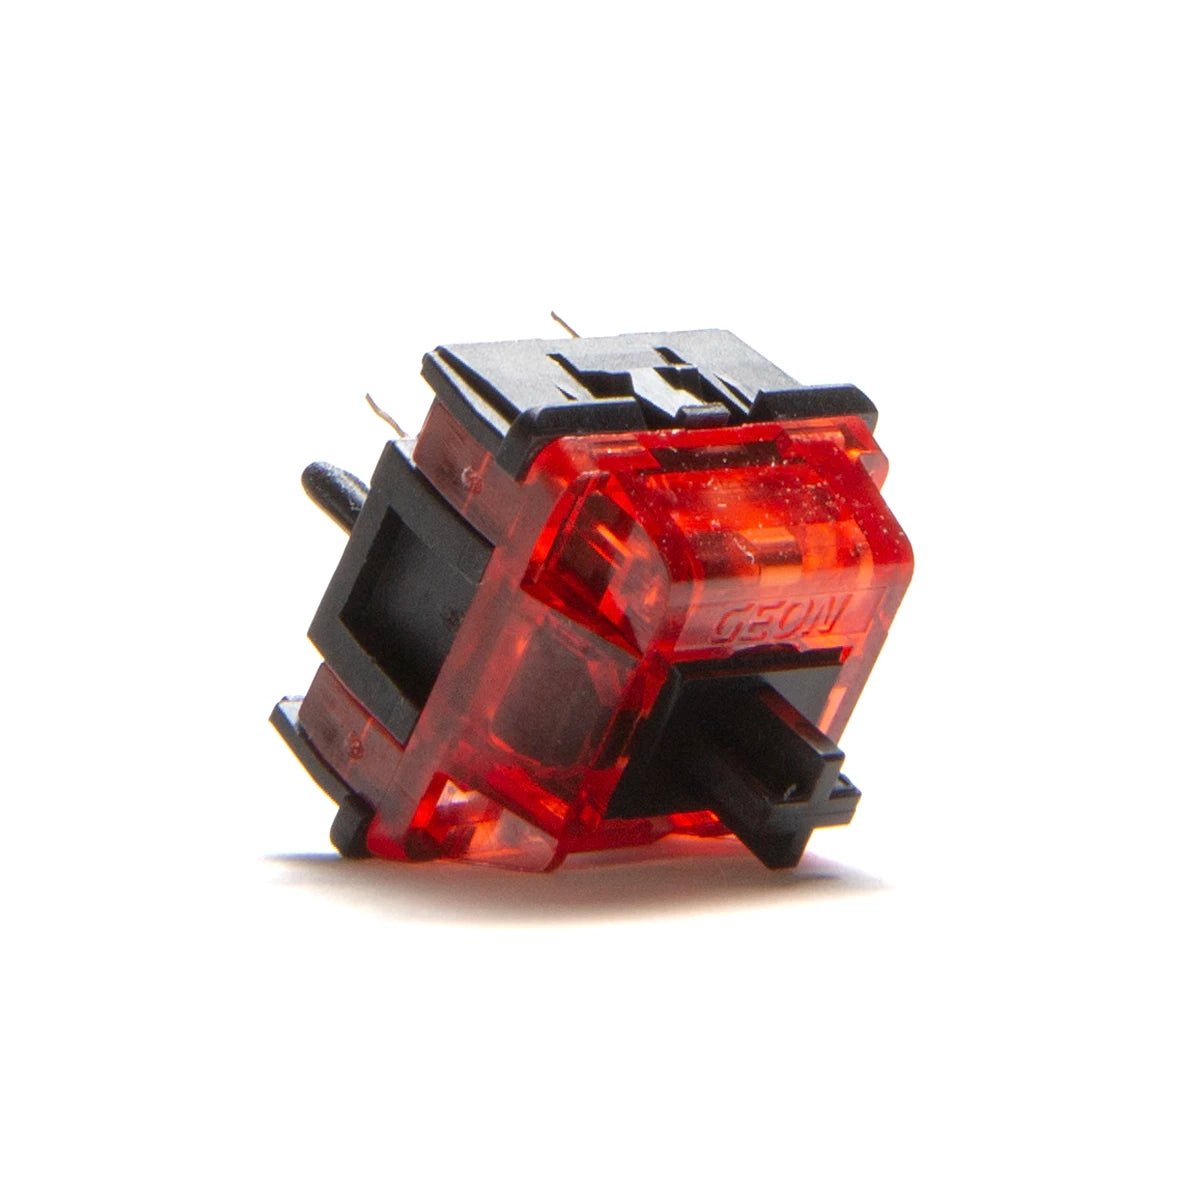 Geon Raptor MX Extreme Gaming Switches - Divinikey